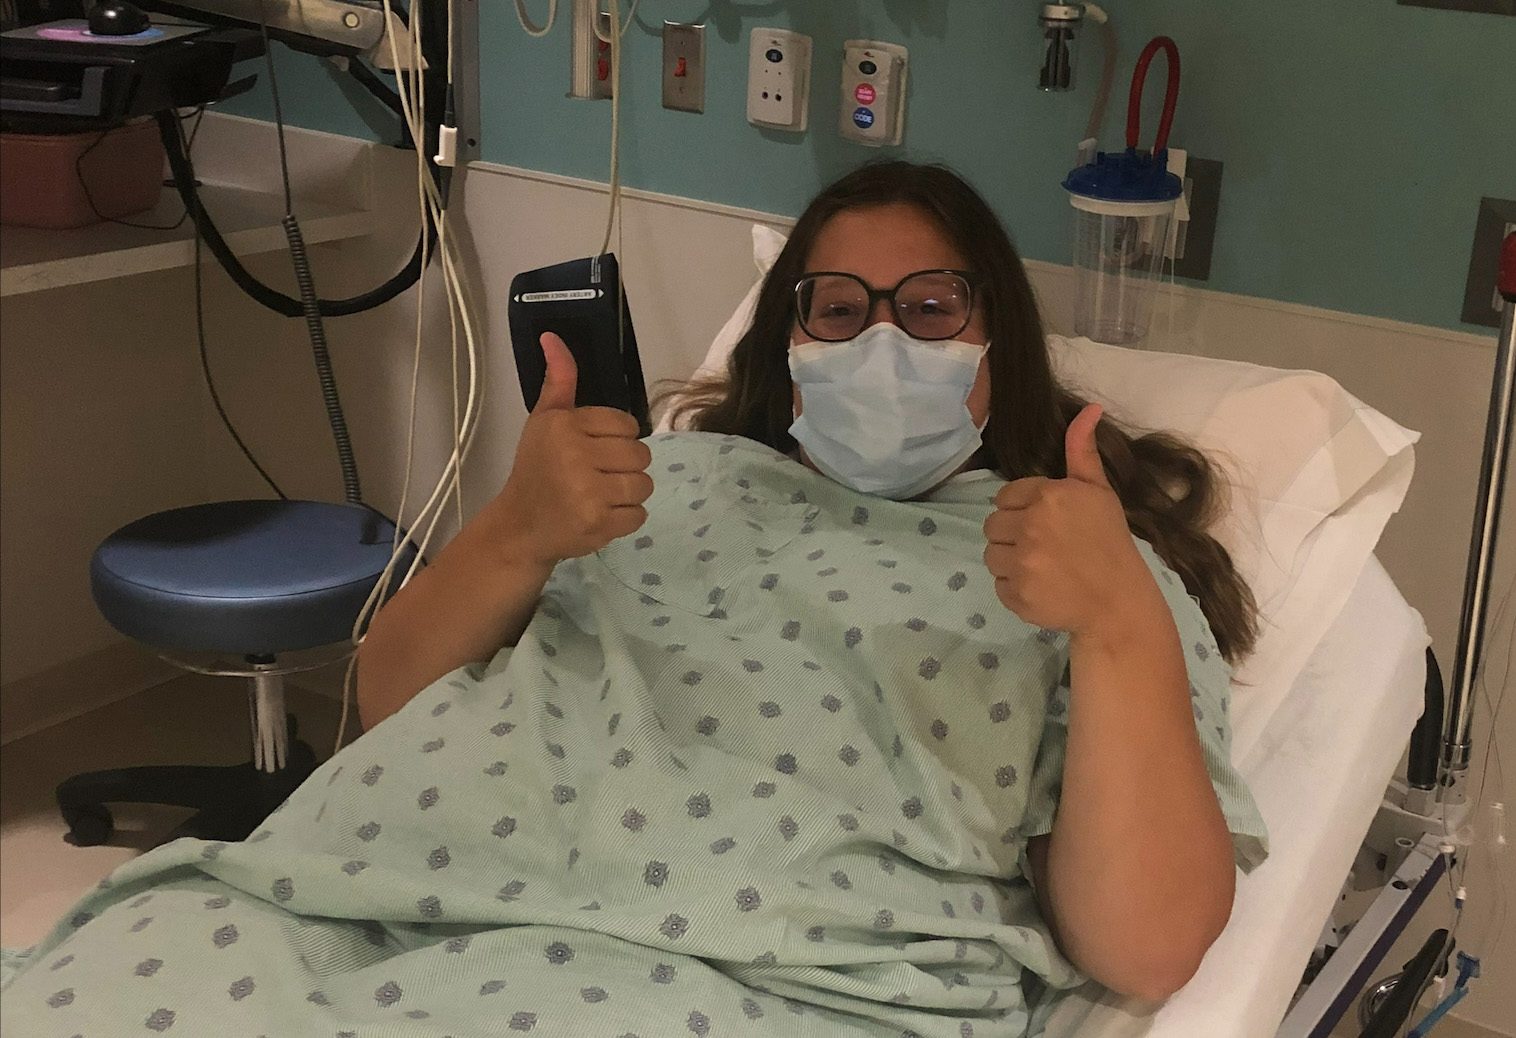 A young woman laying in a hospital bed gives 2 thumbs up